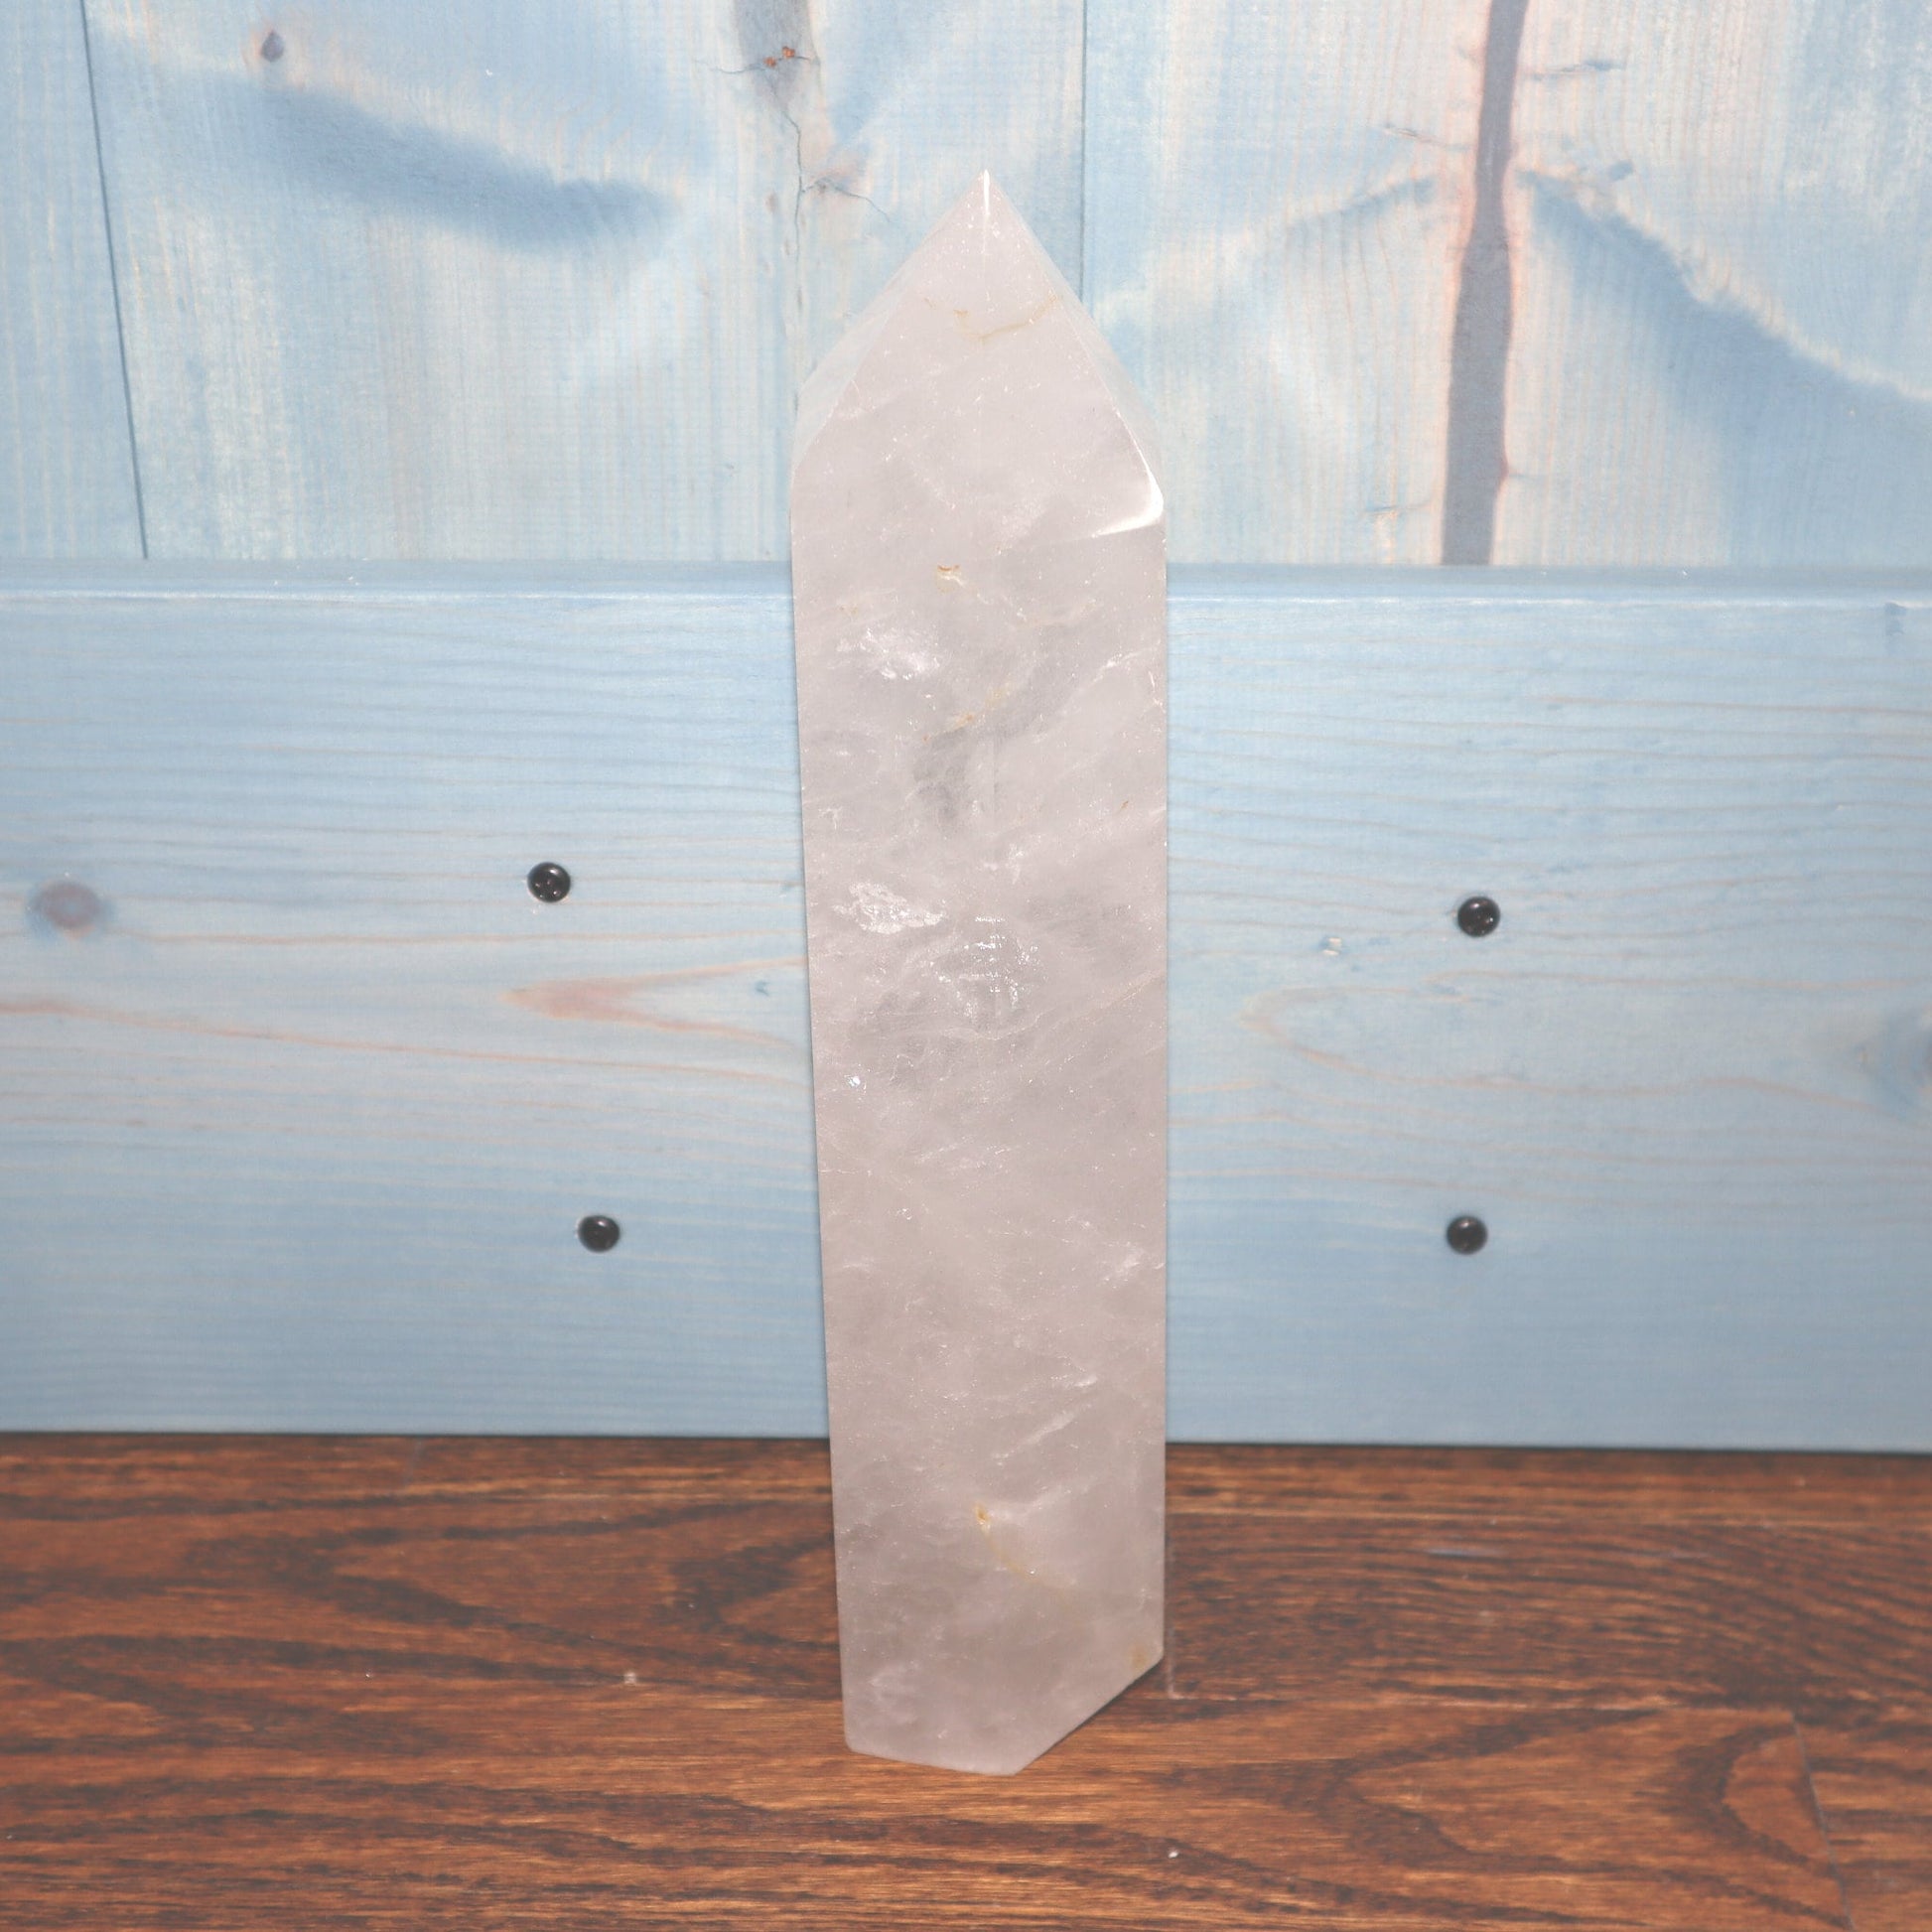 Clear Quartz Tower, Big Clear Quartz Tower, Crystal Collection, Large Crystal Obelisk, 11in Crystal Tower, Clear Quartz Wand, Natural Quartz